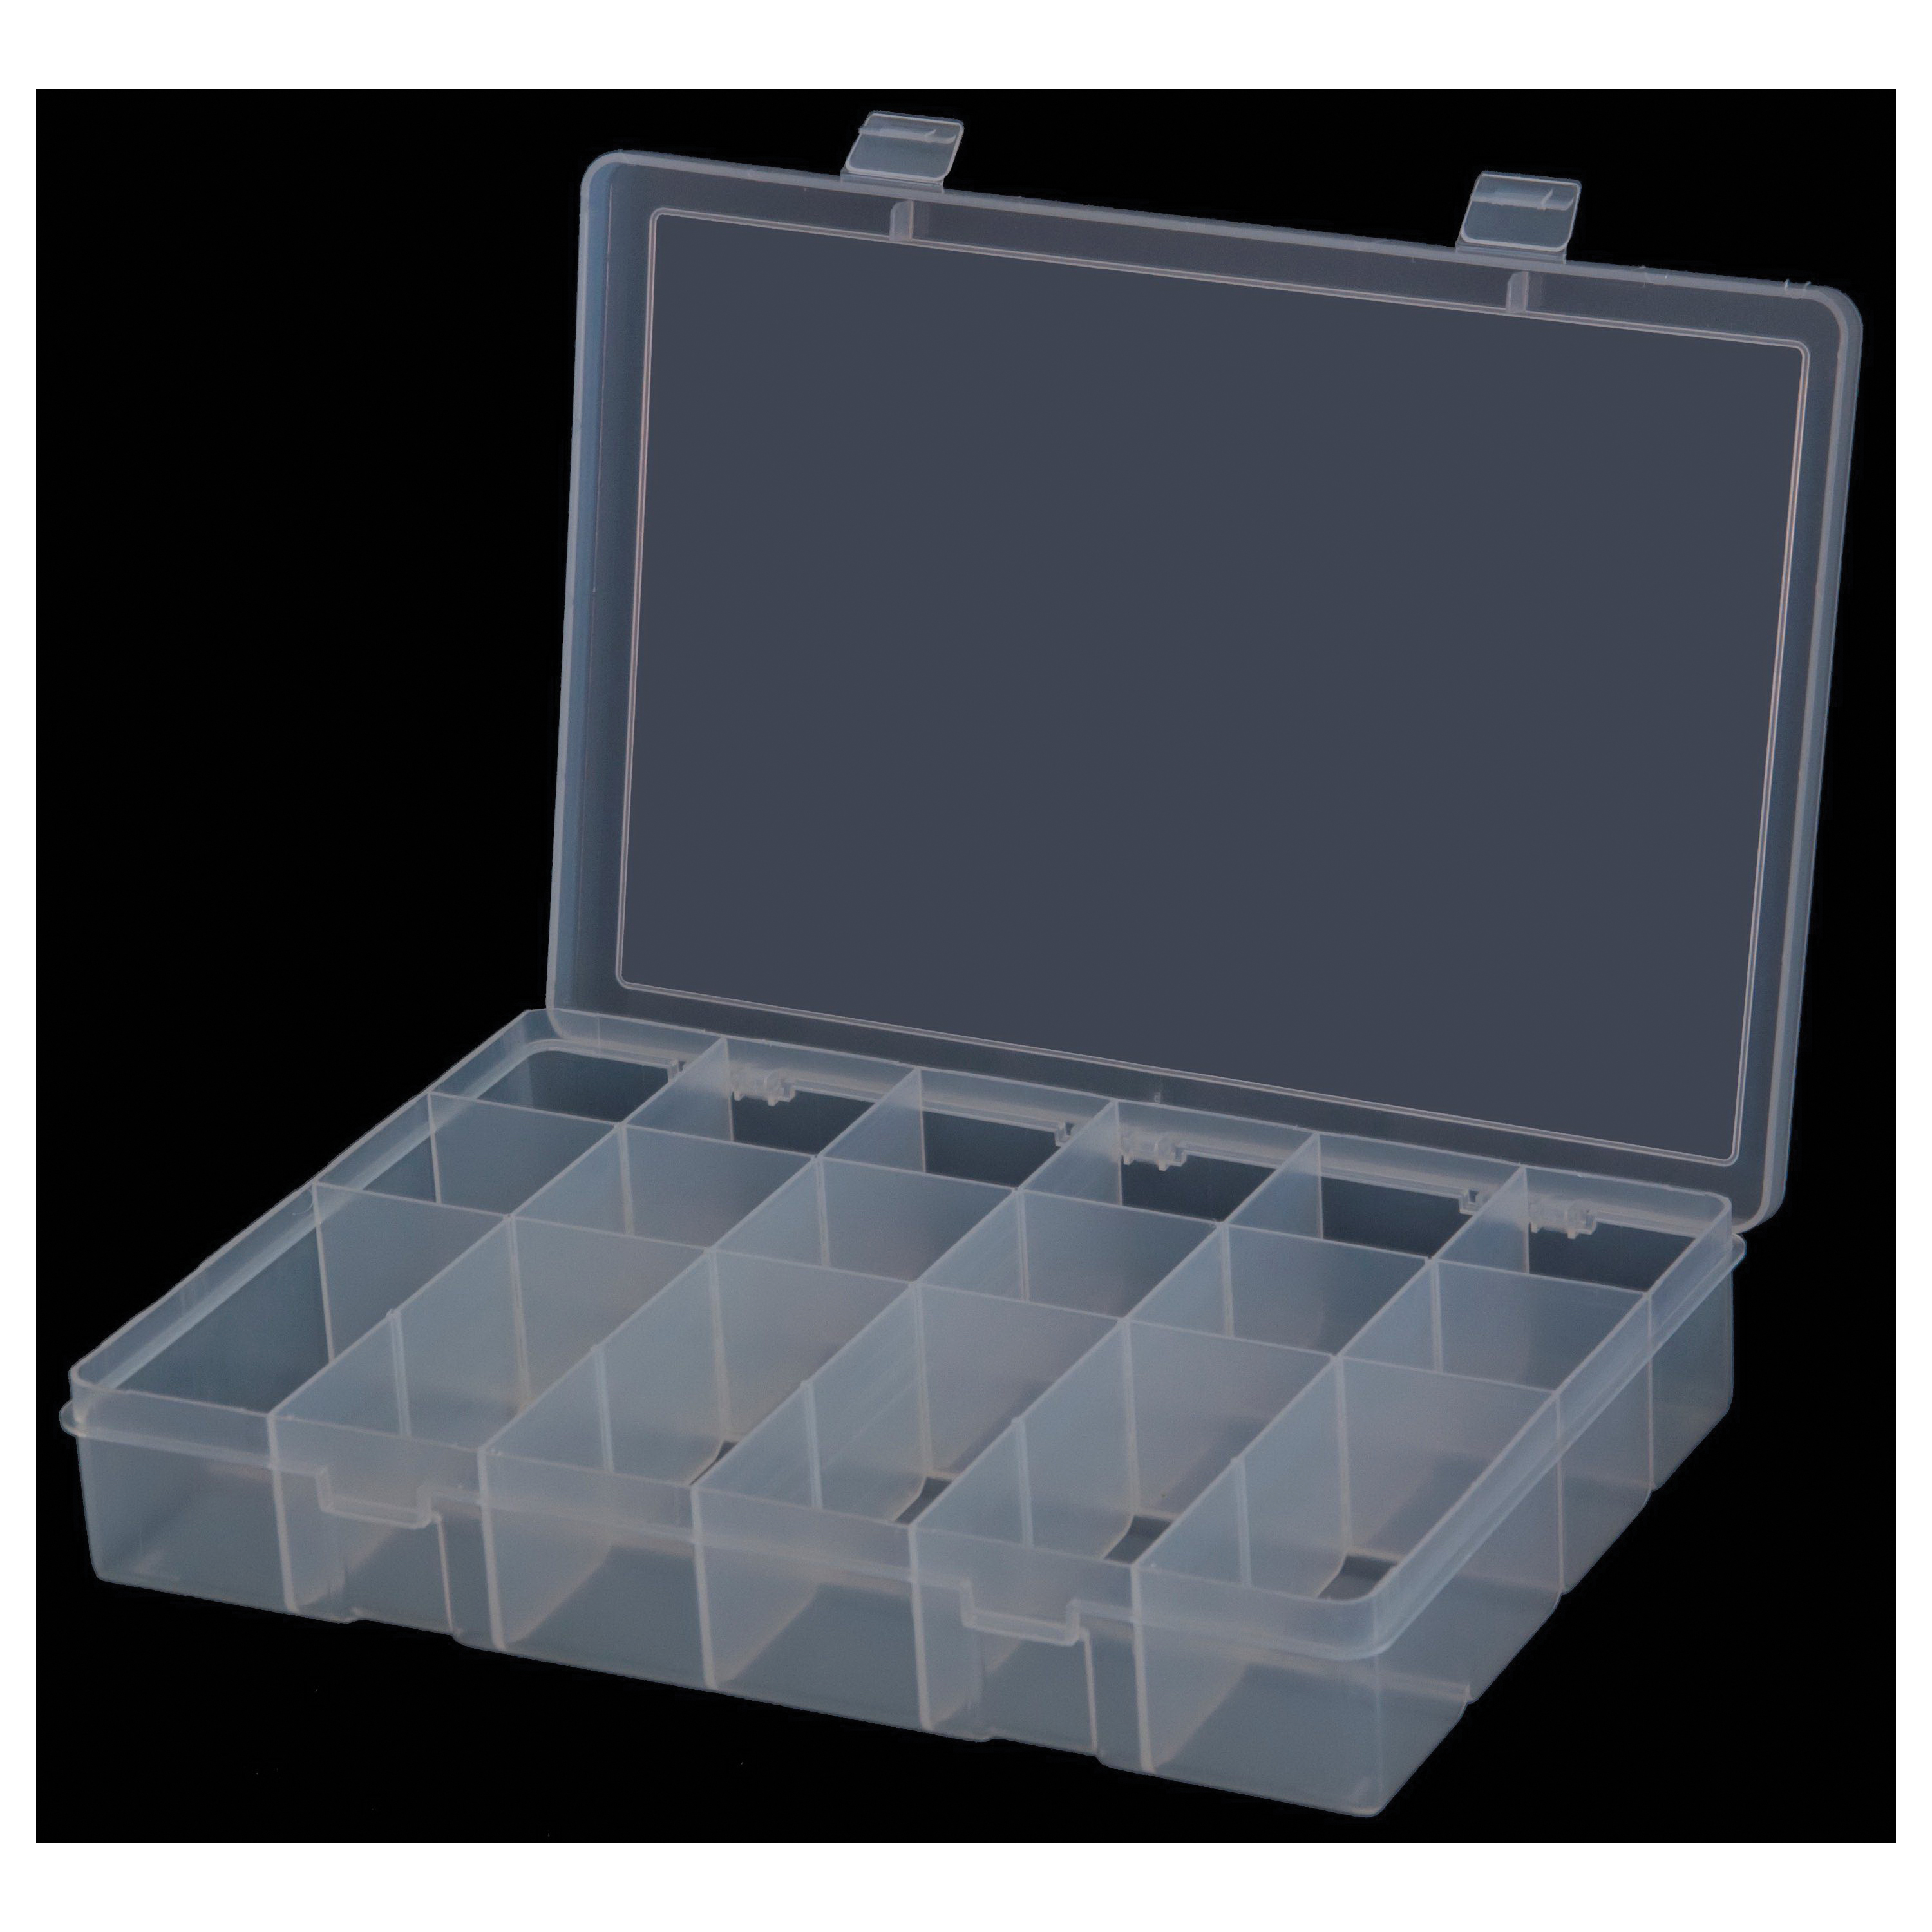 DURHAM MFG® LP18-CLEAR 18-Opening Large Compartment Box, For Use With 291-95 Rack, Polypropylene, Clear